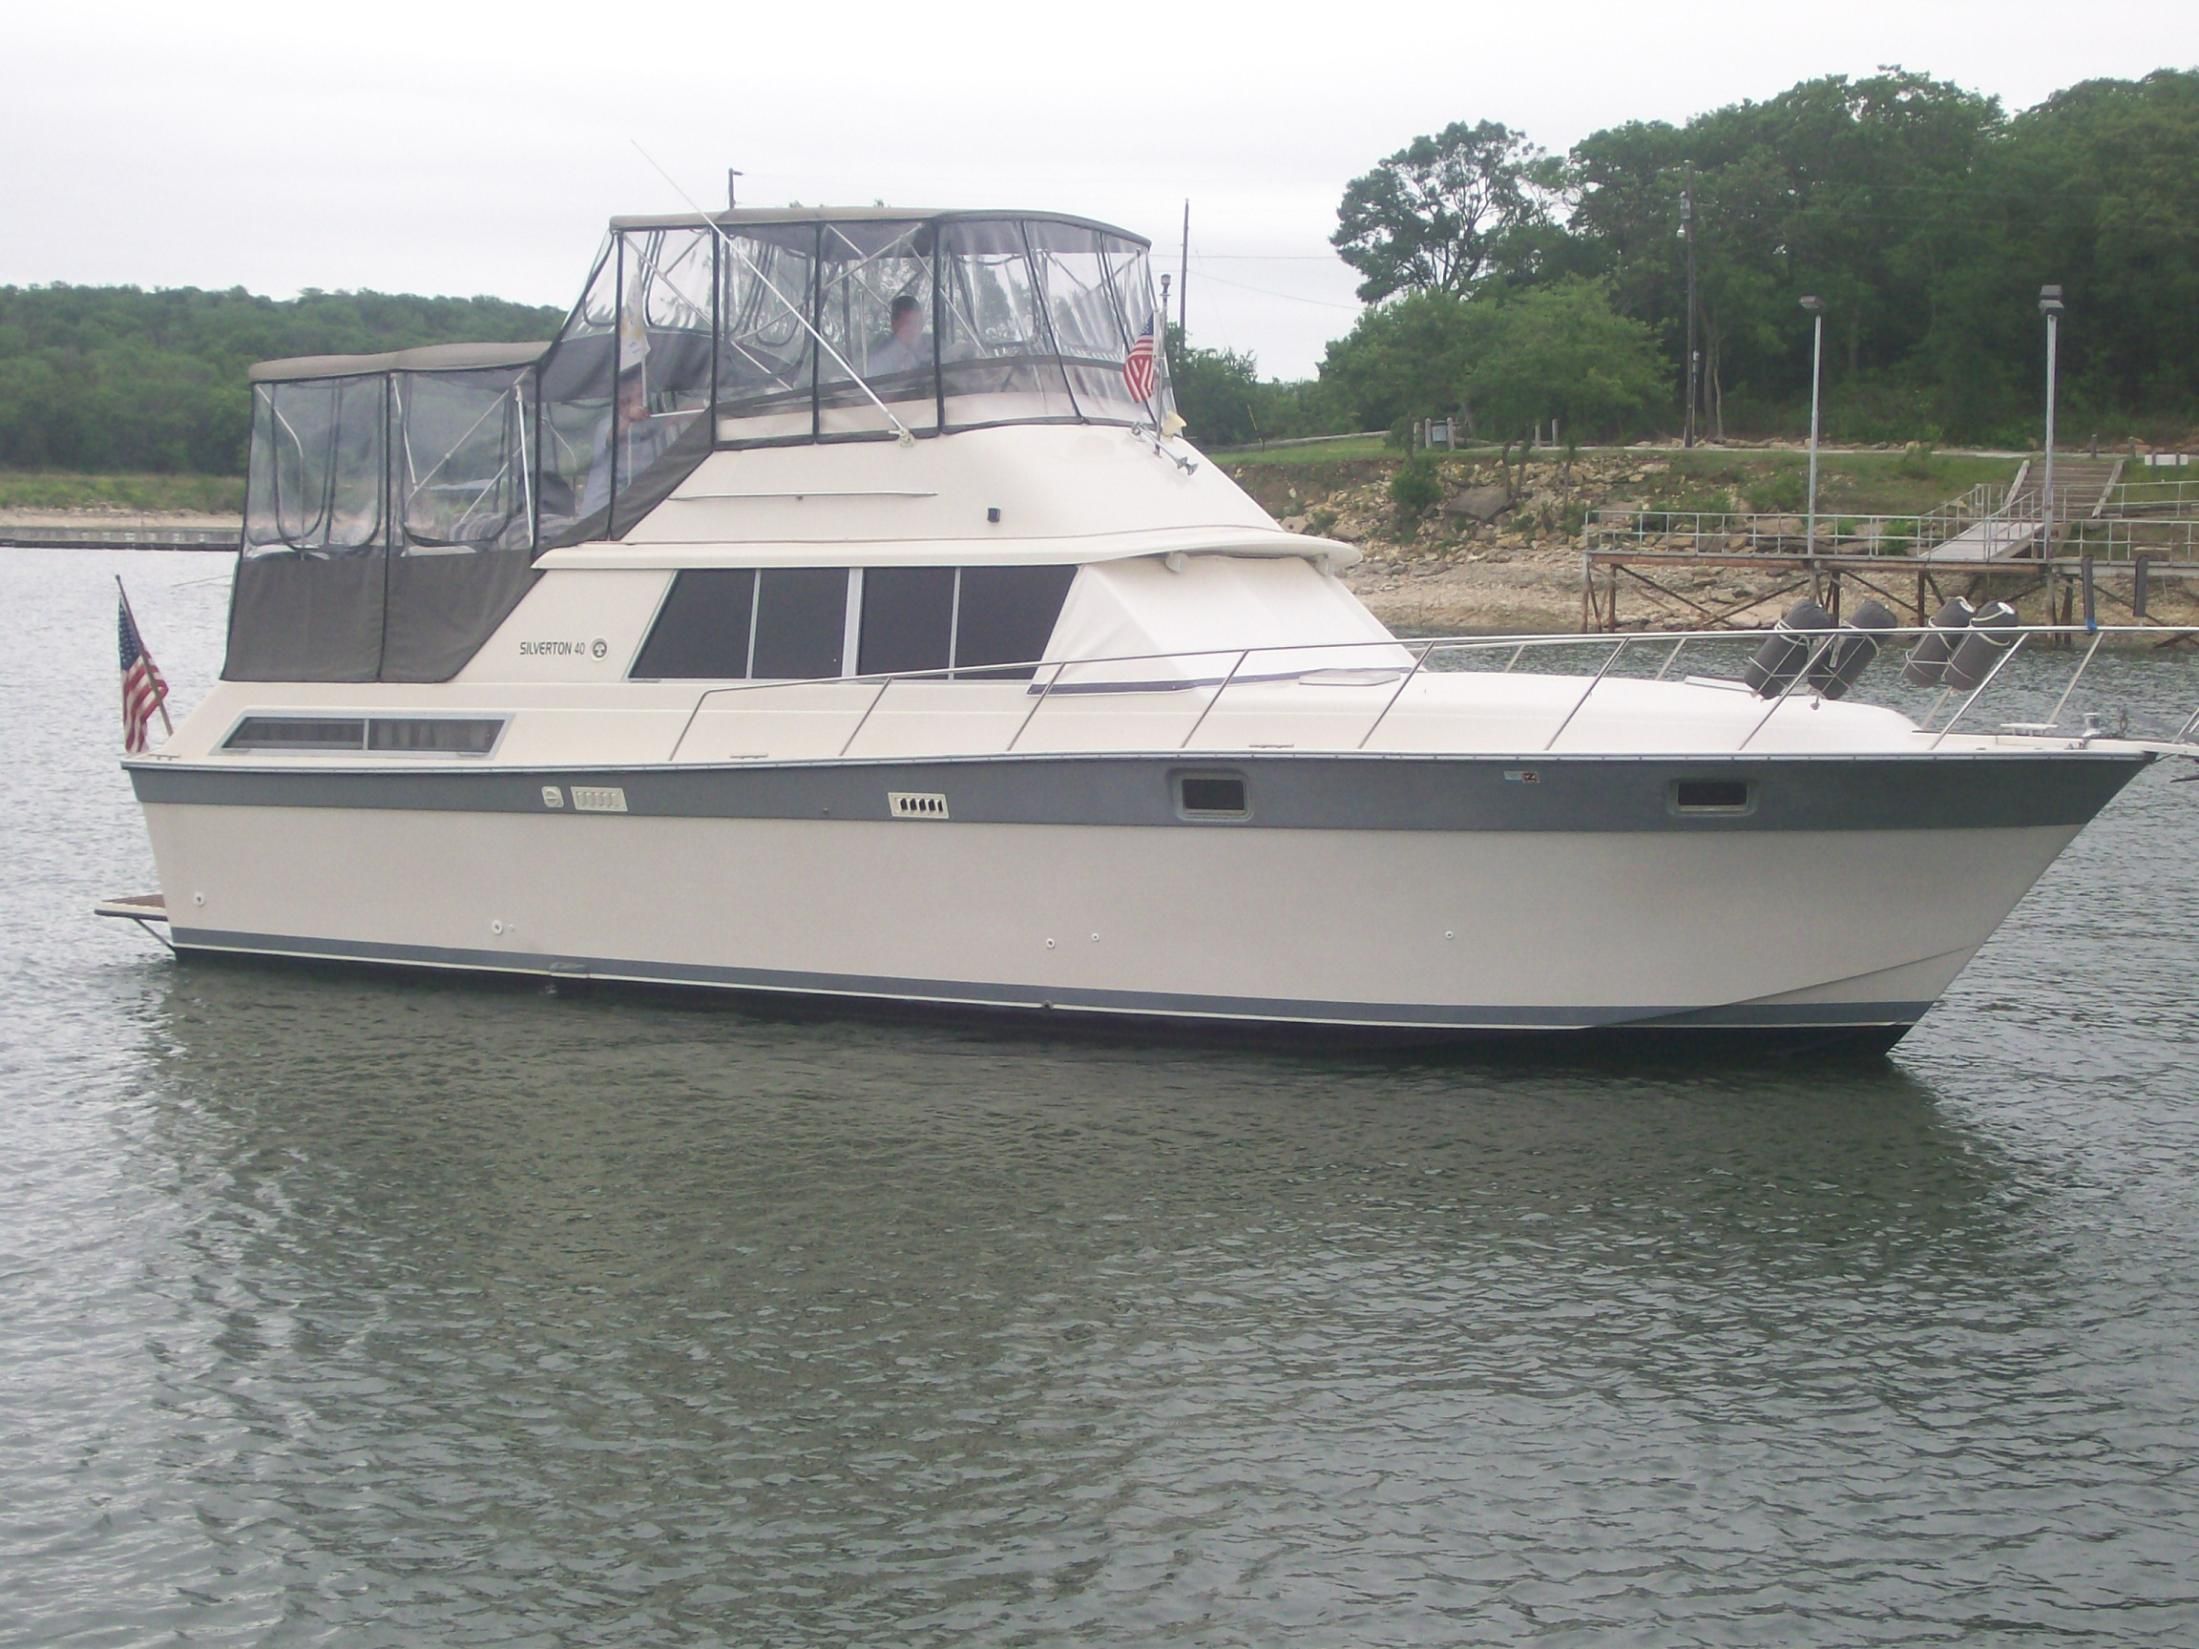 1985 Silverton AFT CABIN Power boat for sale, located in Texas, DENISON.